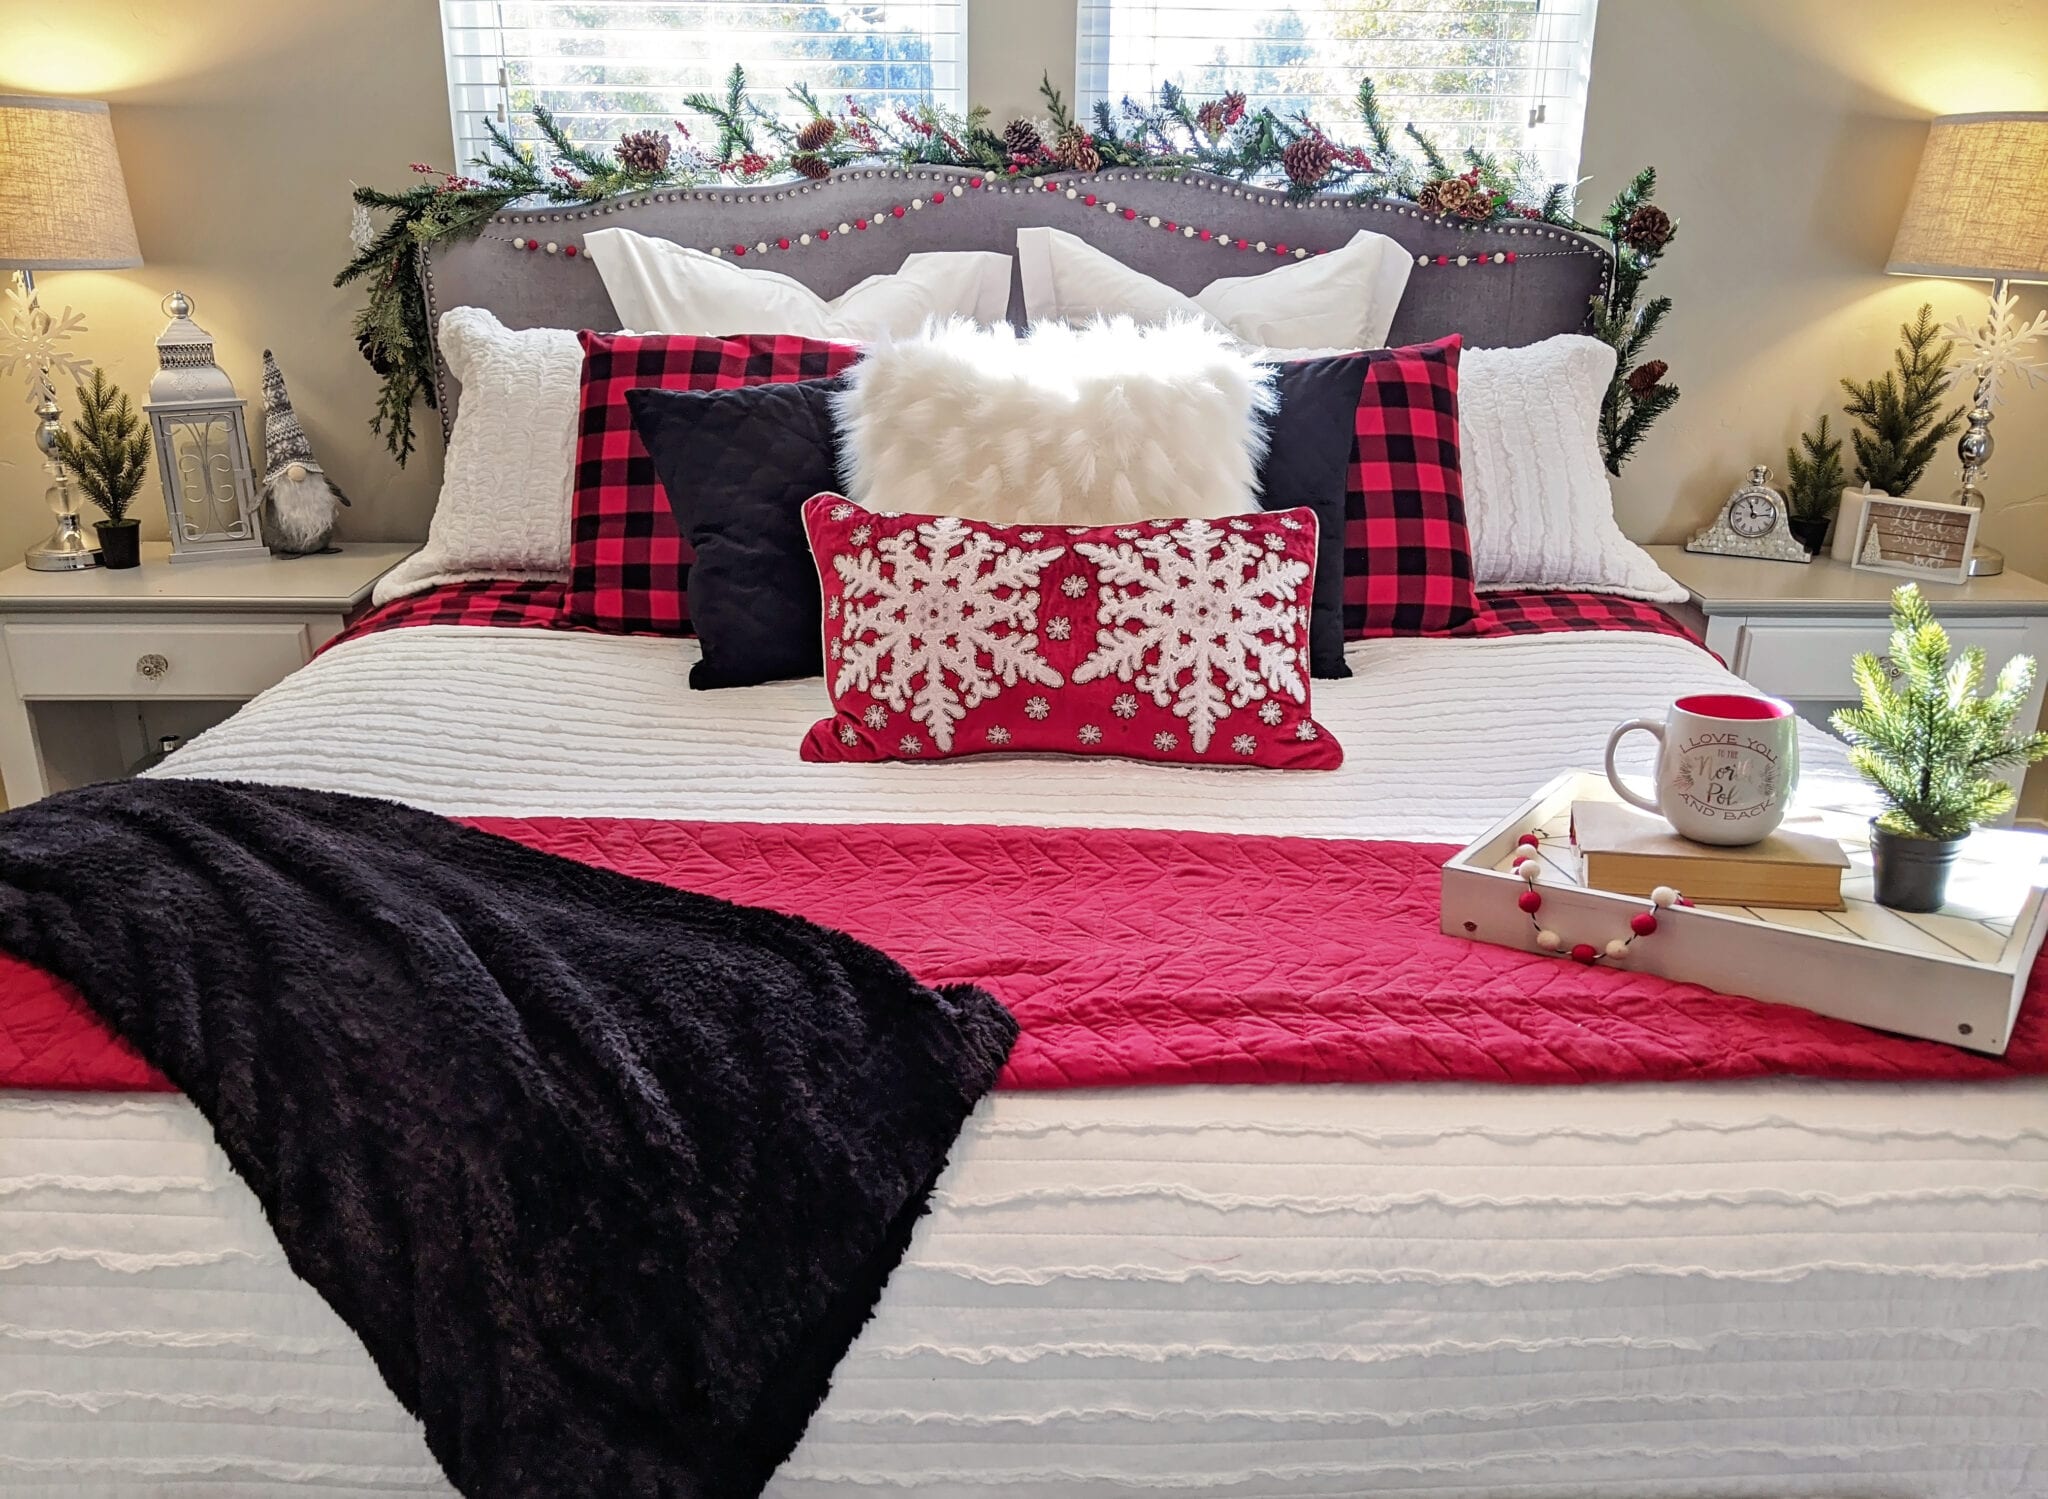 Easy Bedroom Christmas Decorations